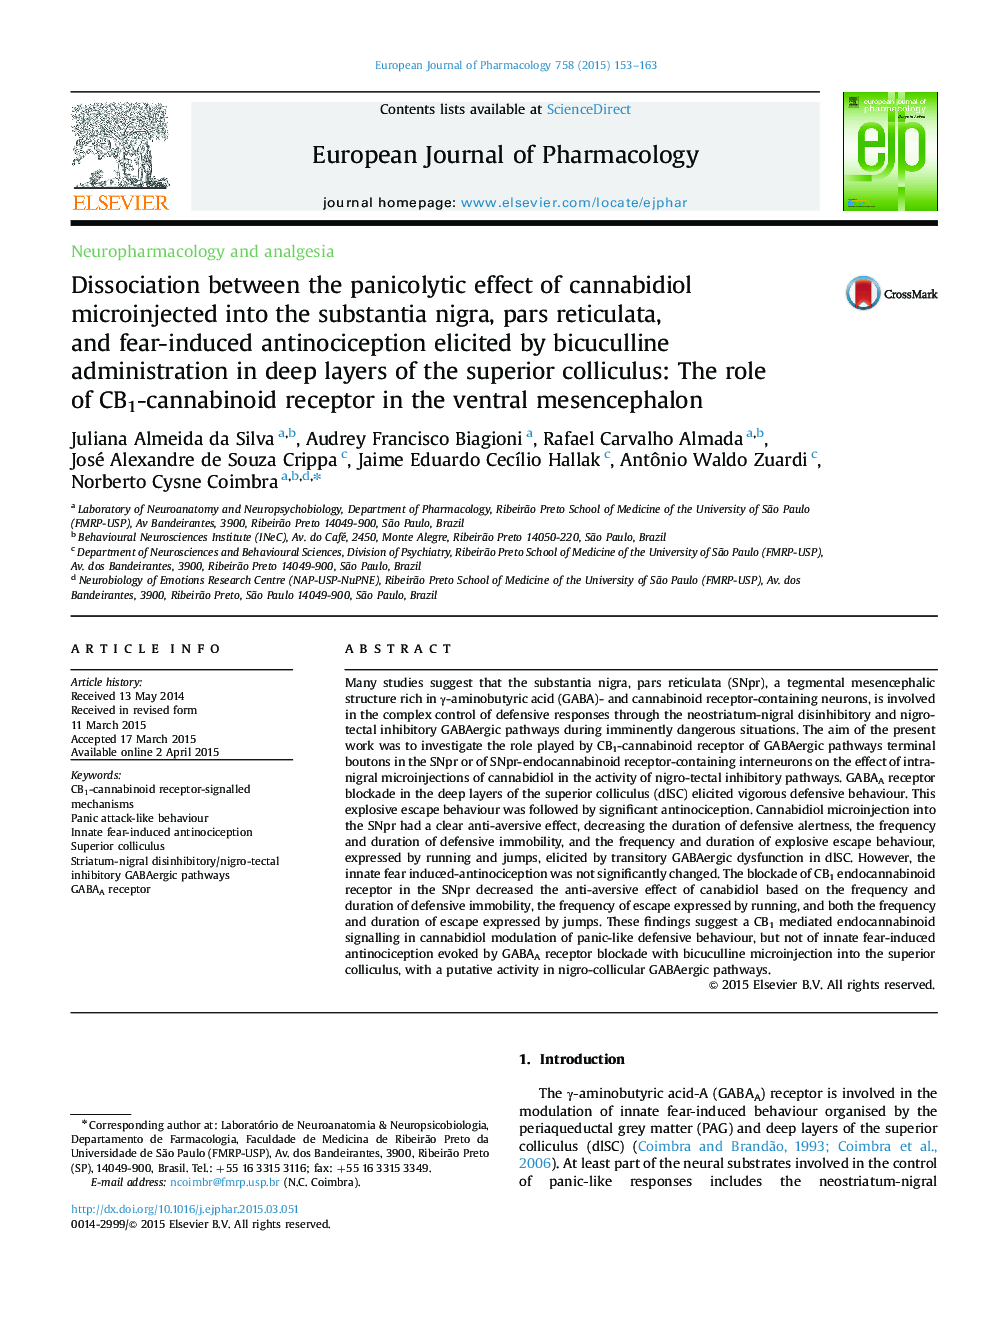 Neuropharmacology and analgesiaDissociation between the panicolytic effect of cannabidiol microinjected into the substantia nigra, pars reticulata, and fear-induced antinociception elicited by bicuculline administration in deep layers of the superior coll